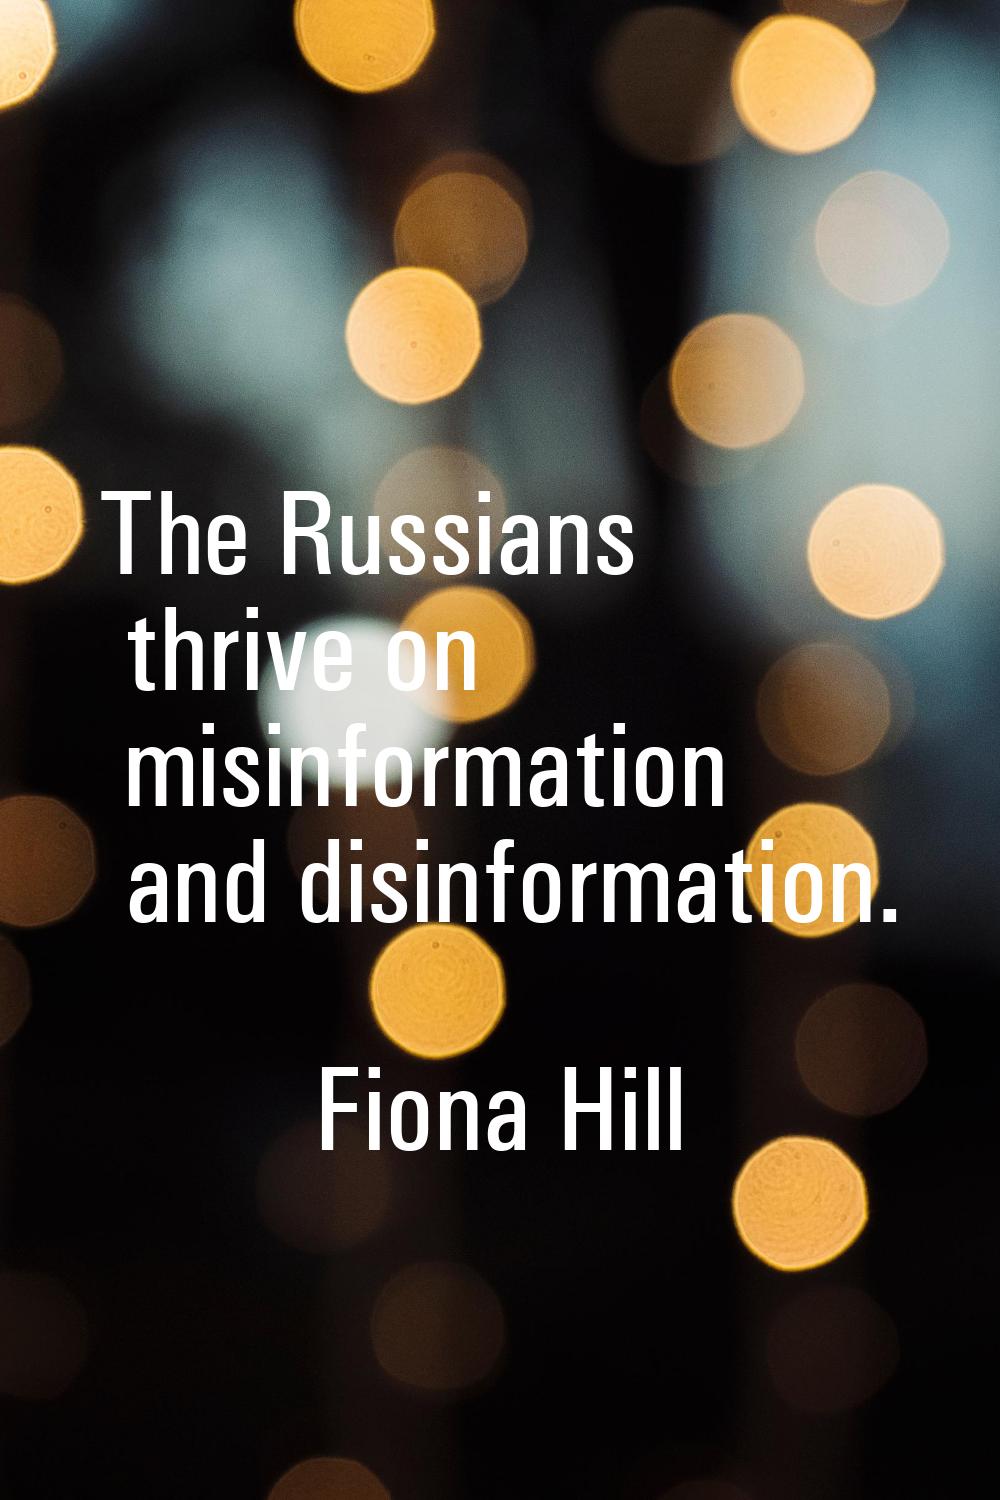 The Russians thrive on misinformation and disinformation.